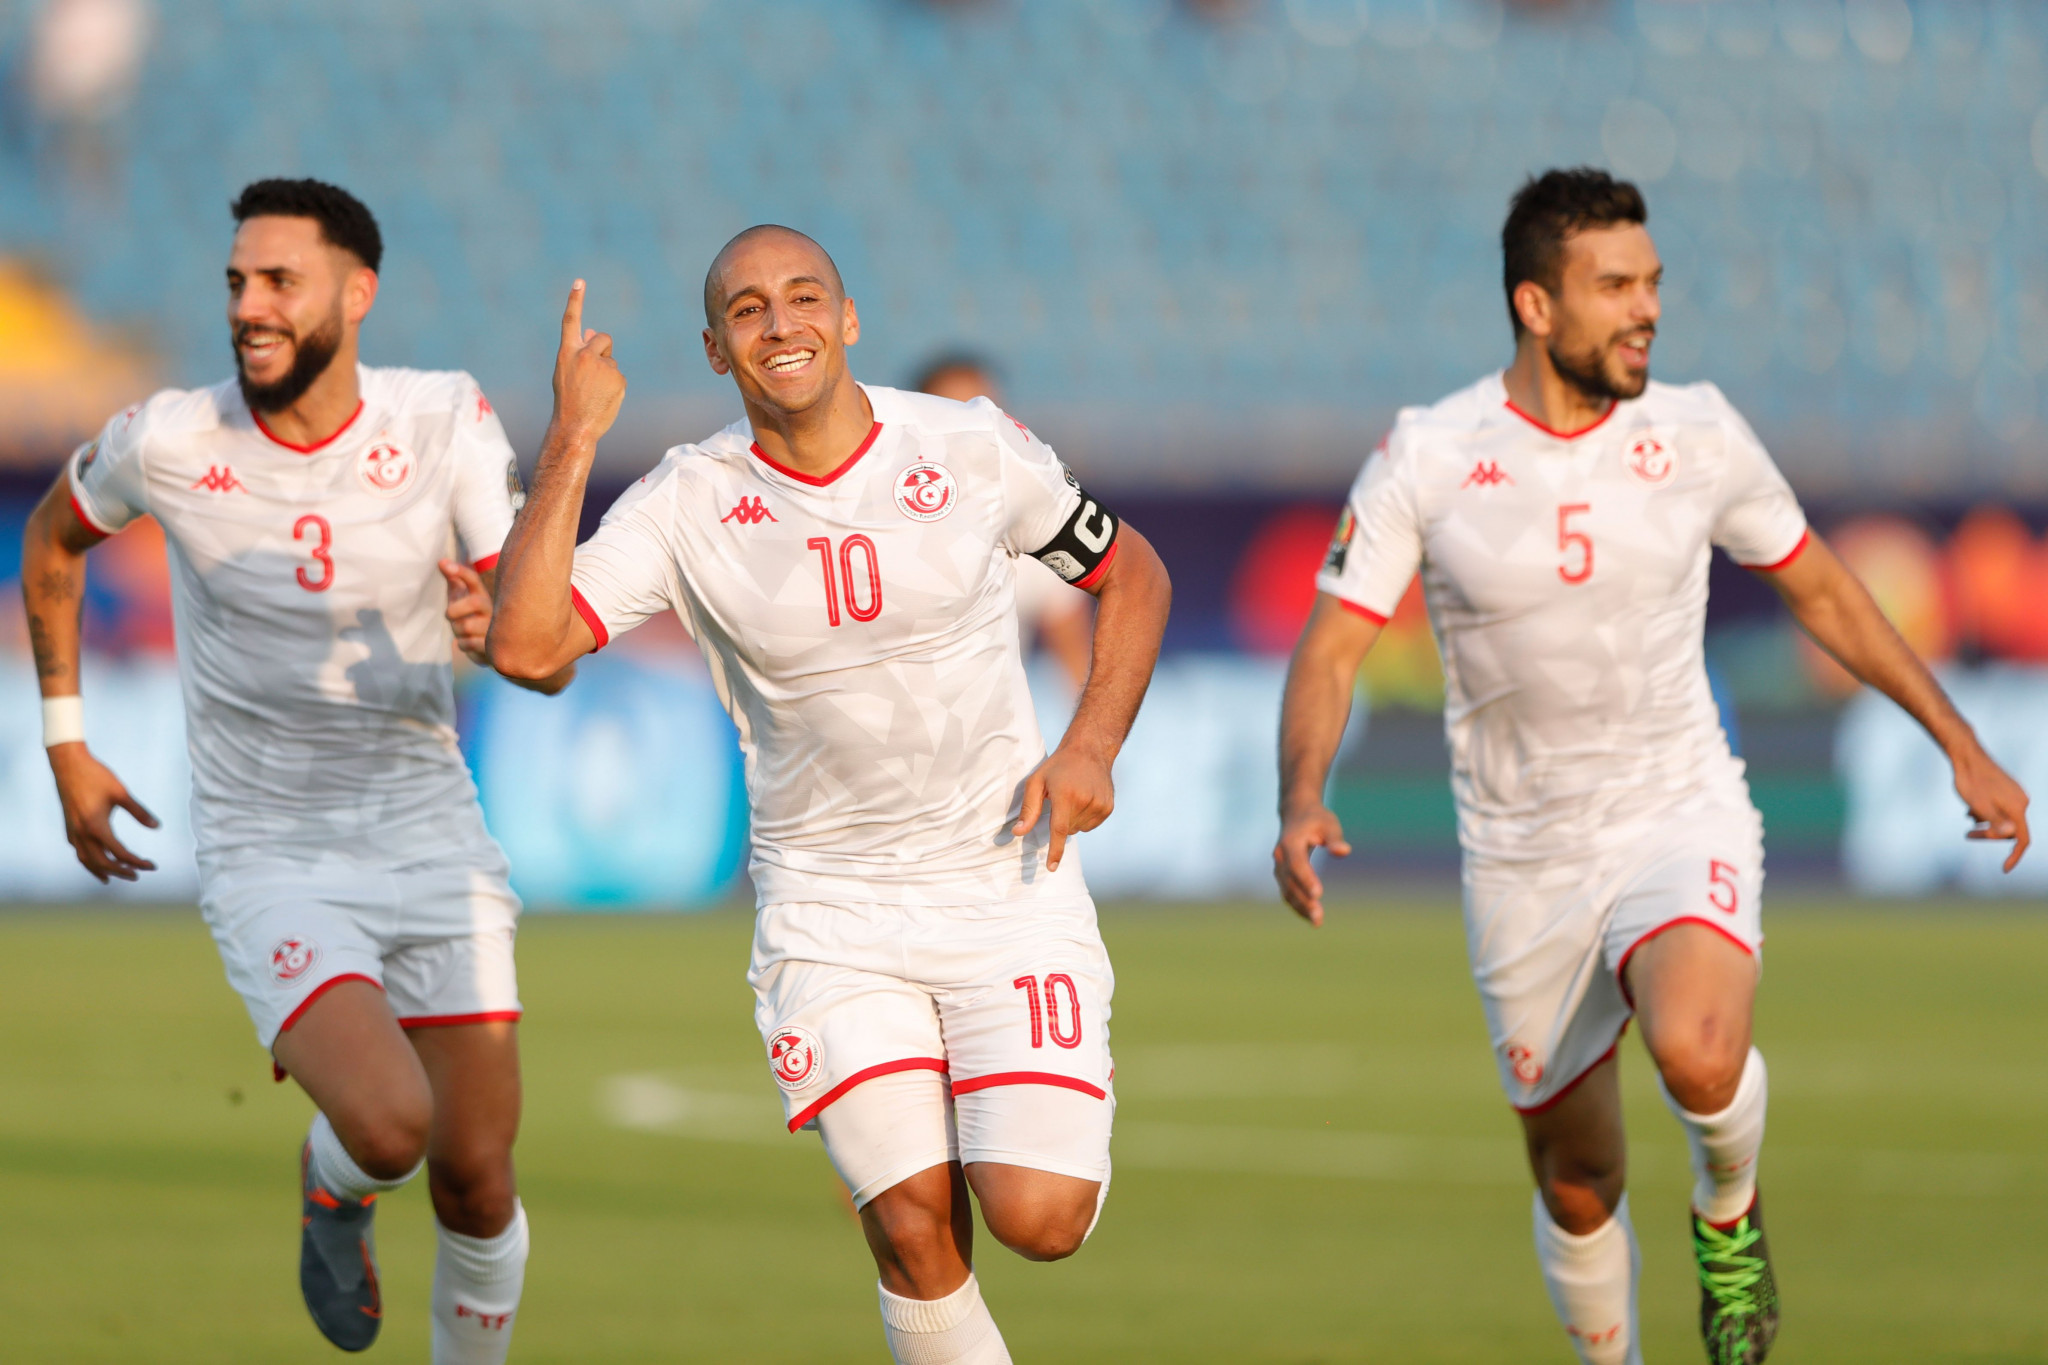 Deflected Khazri free-kick earns Tunisia draw with Mali at Africa Cup of Nations